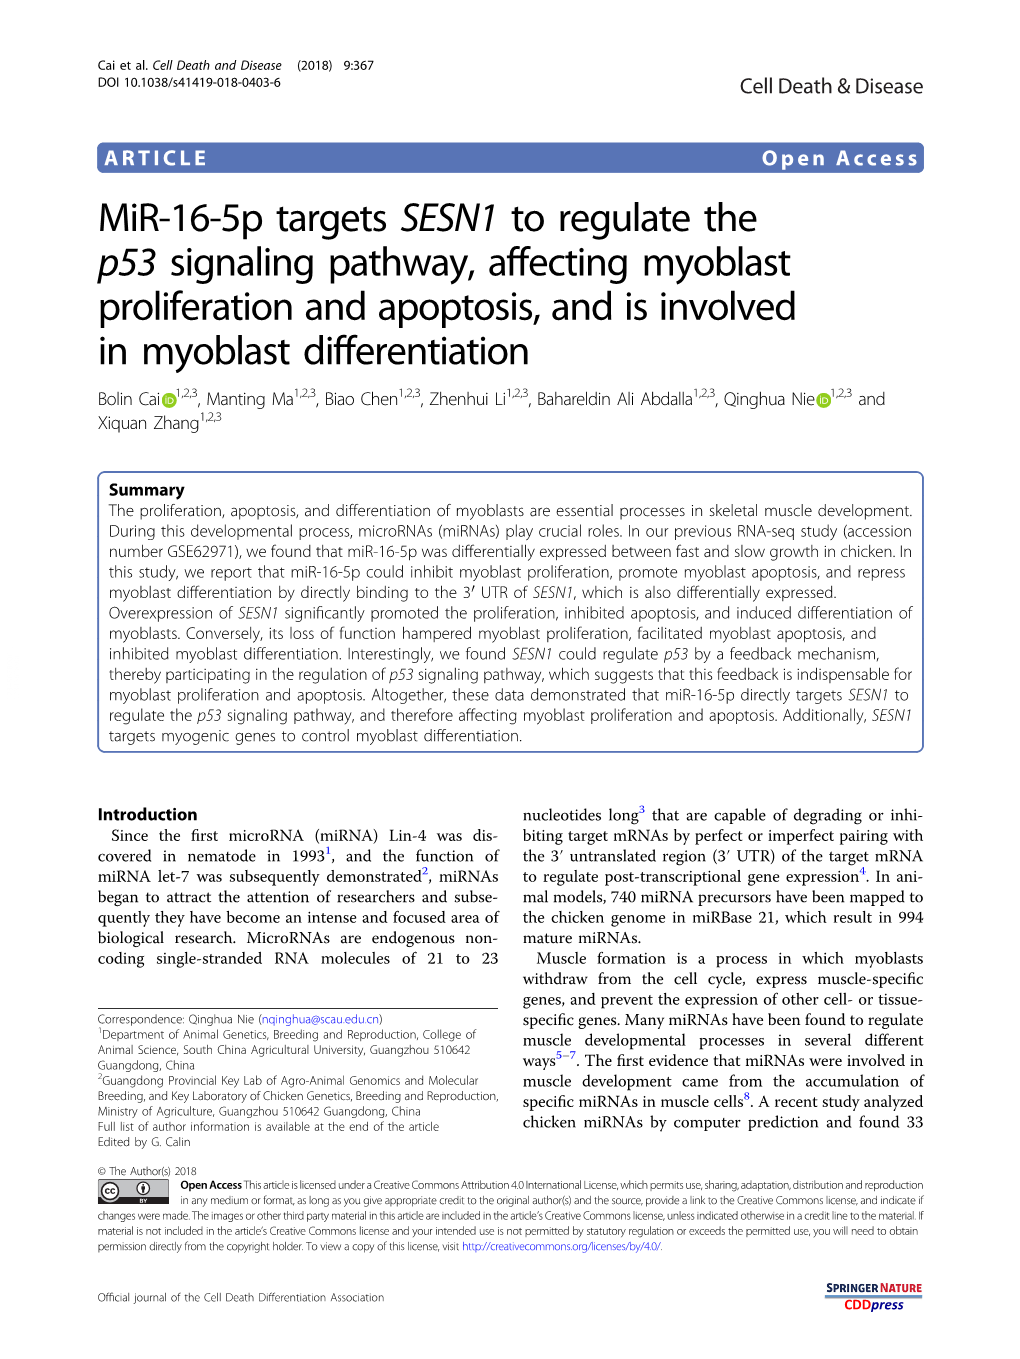 Mir-16-5P Targets SESN1 to Regulate the P53 Signaling Pathway, Affecting